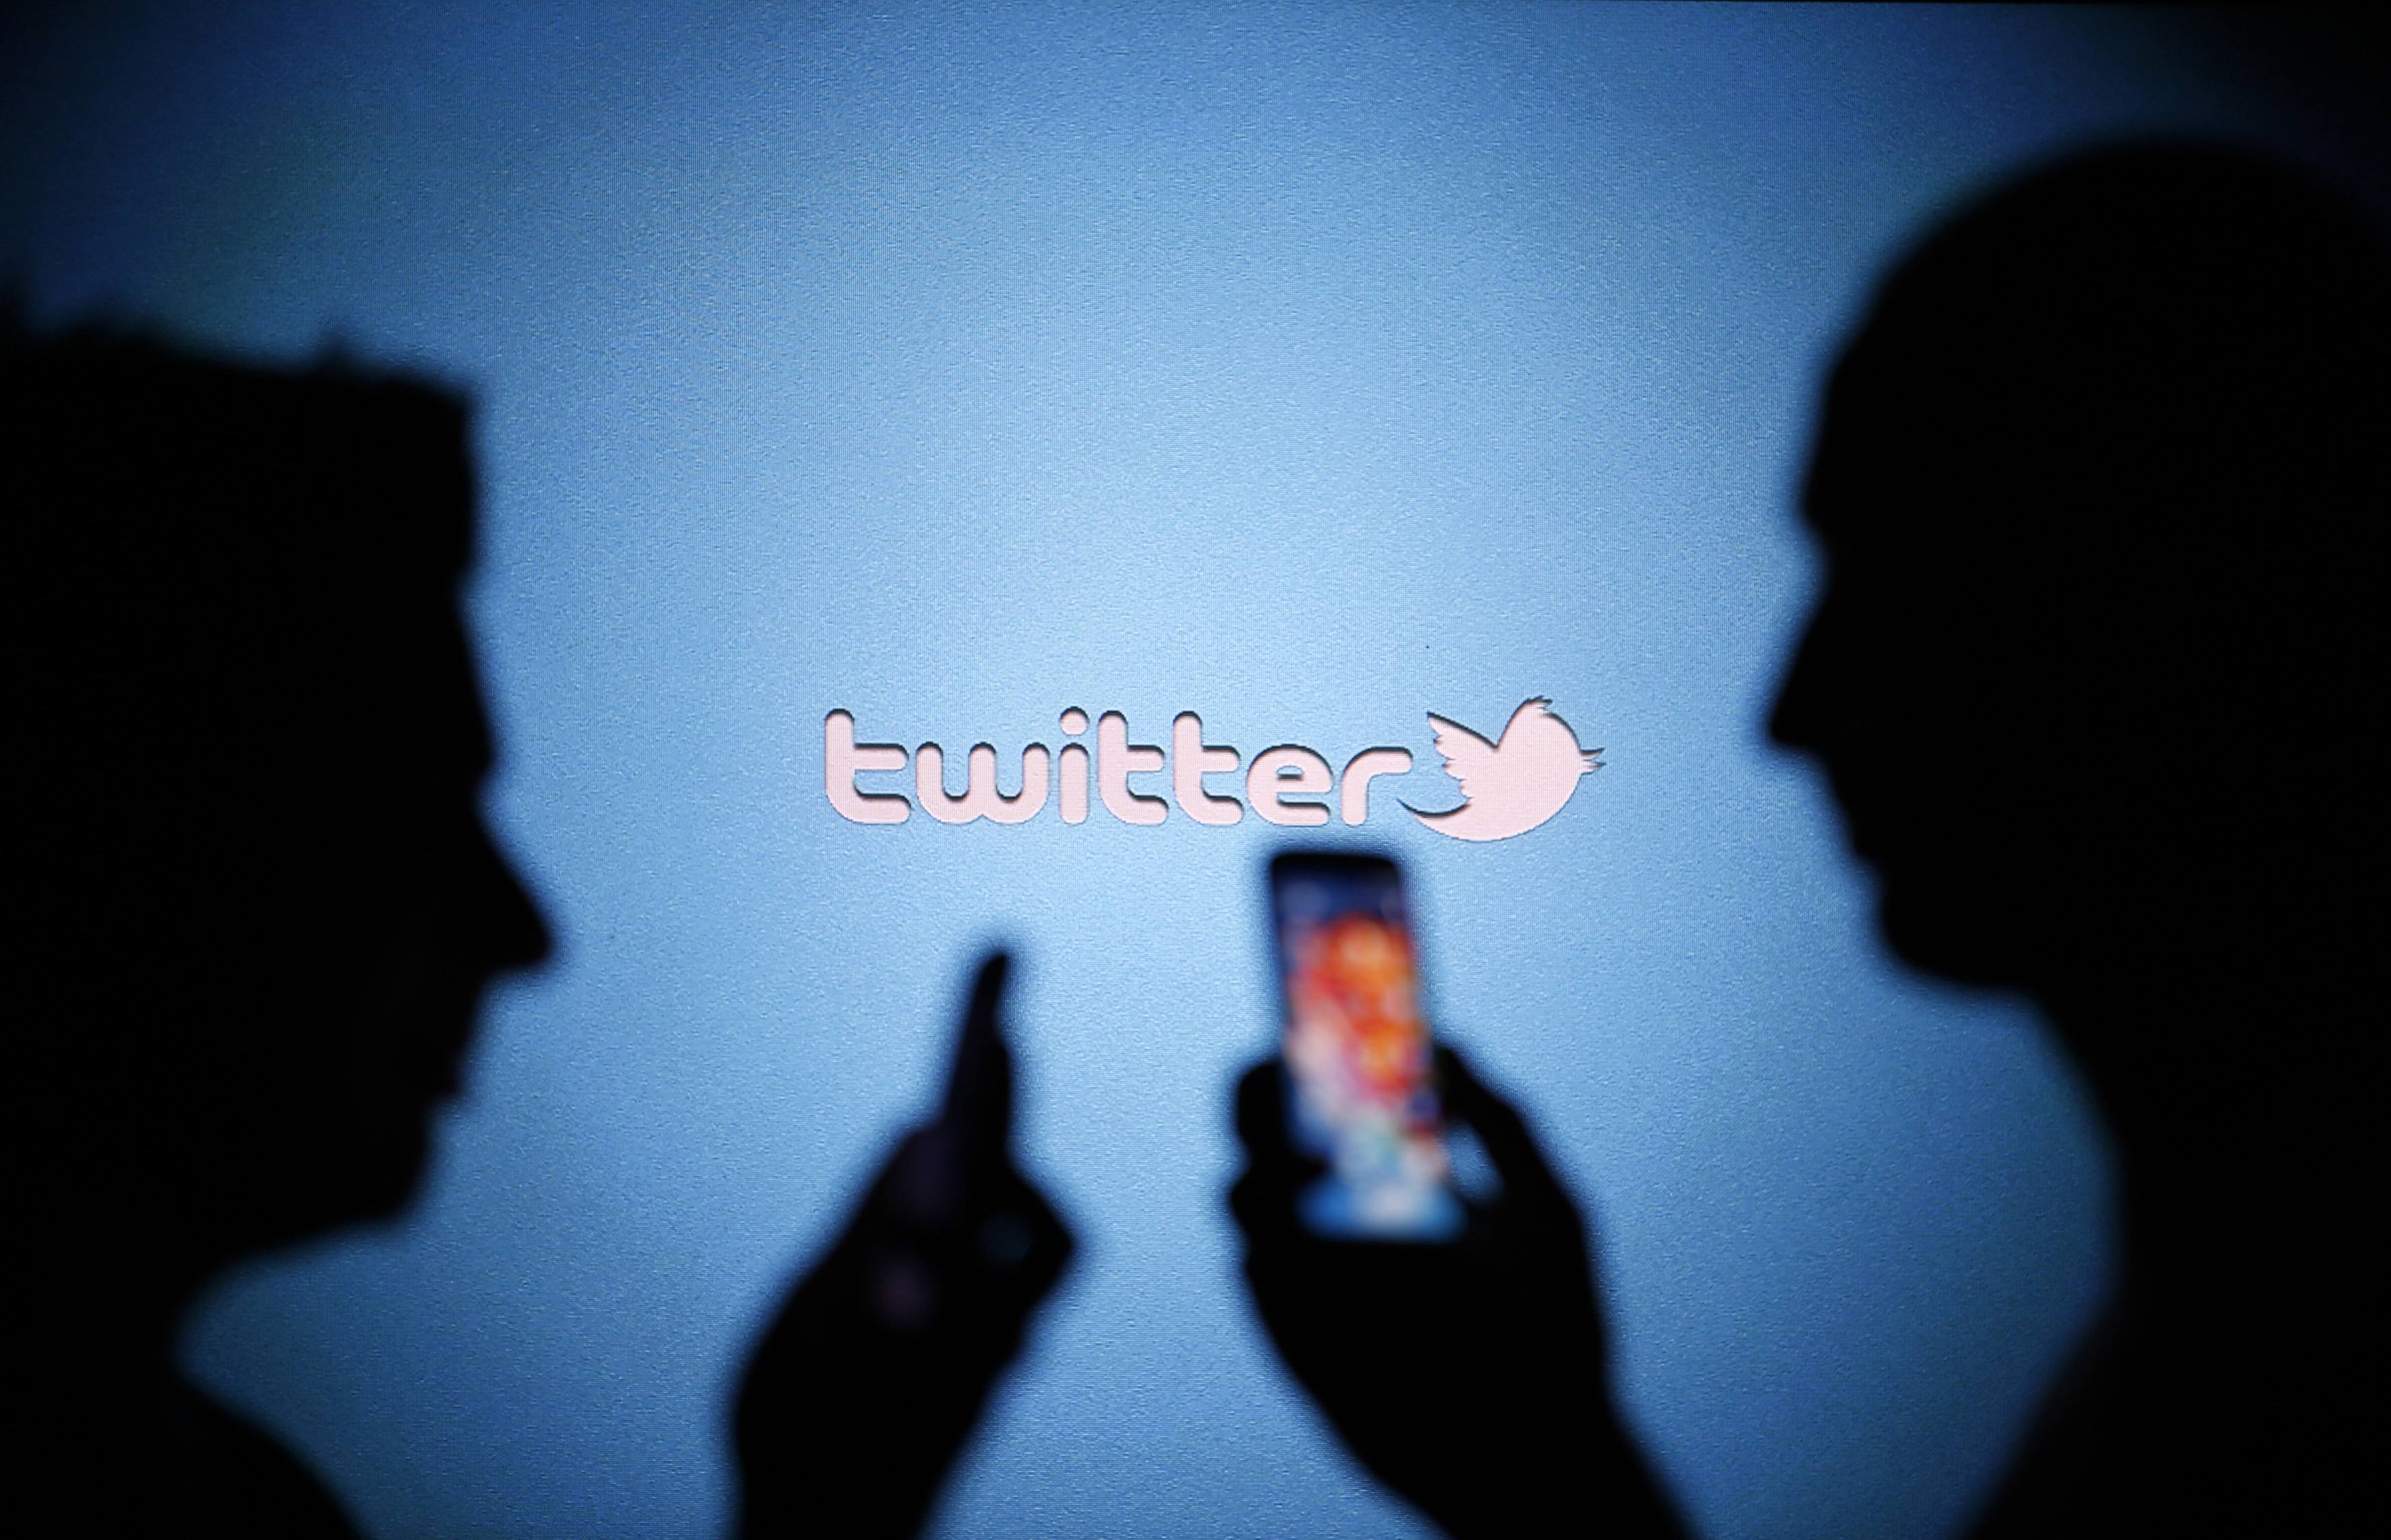 Twitter launches emergency alerts